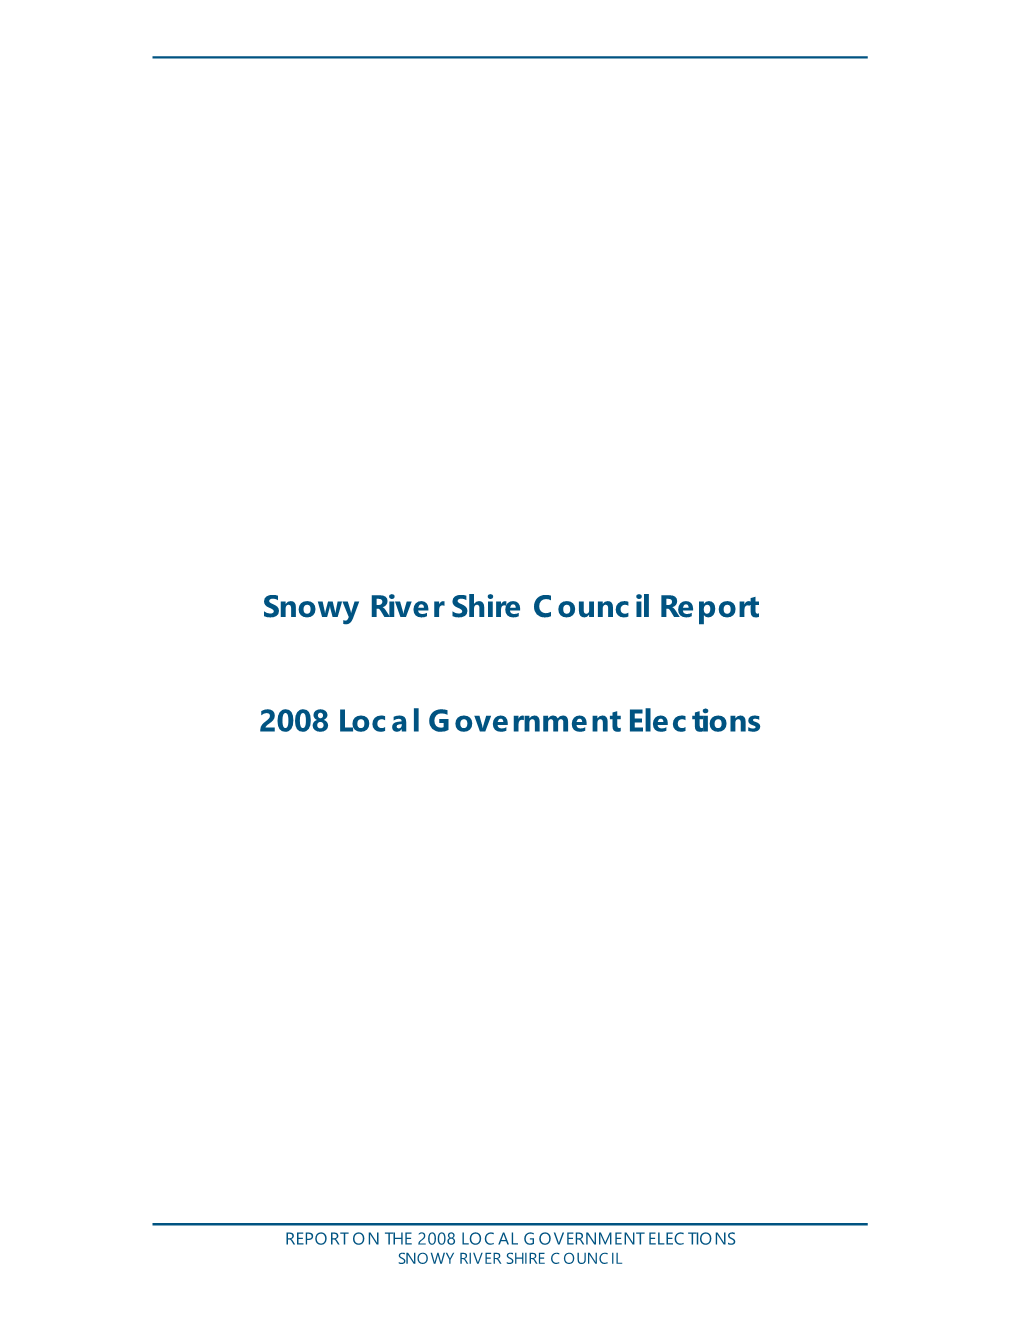 Snowy River Shire Council Report 2008 Local Government Elections